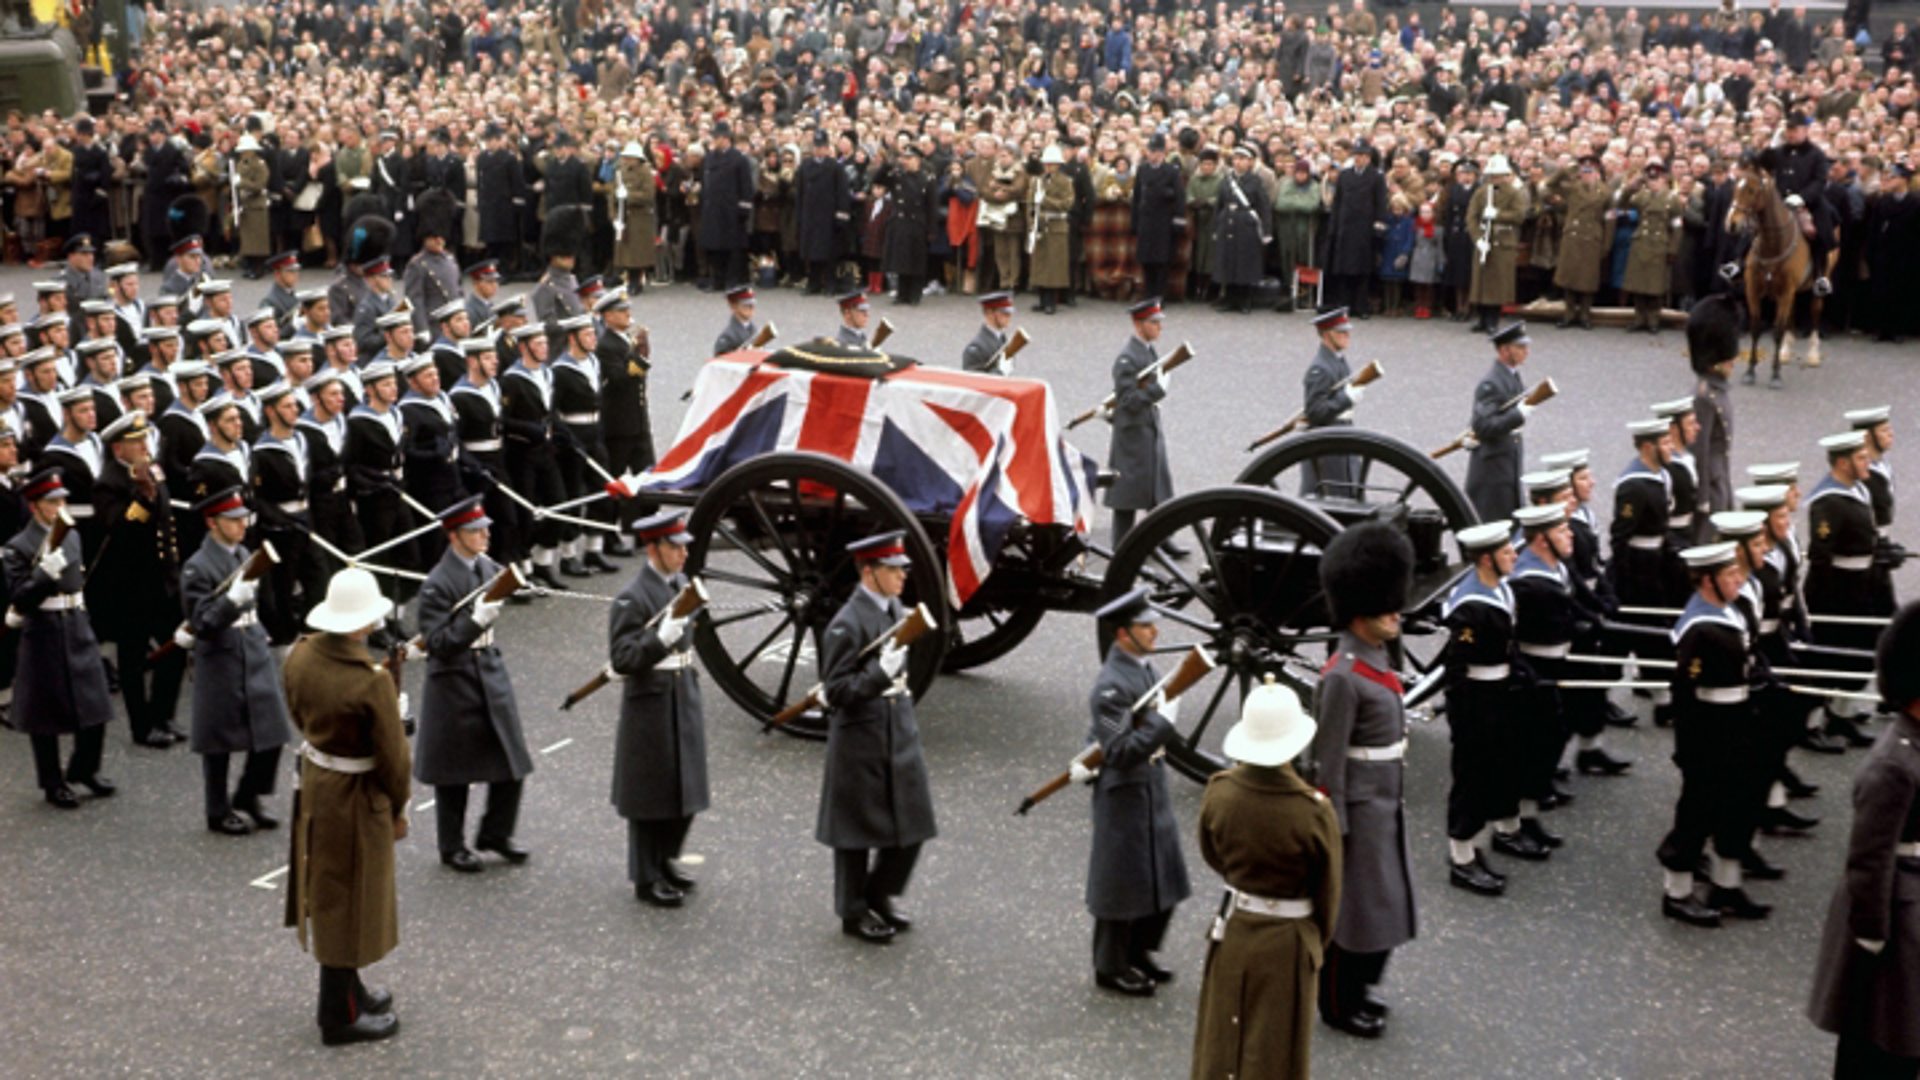 The State Funeral of Sir Winston Churchill - BBC 100